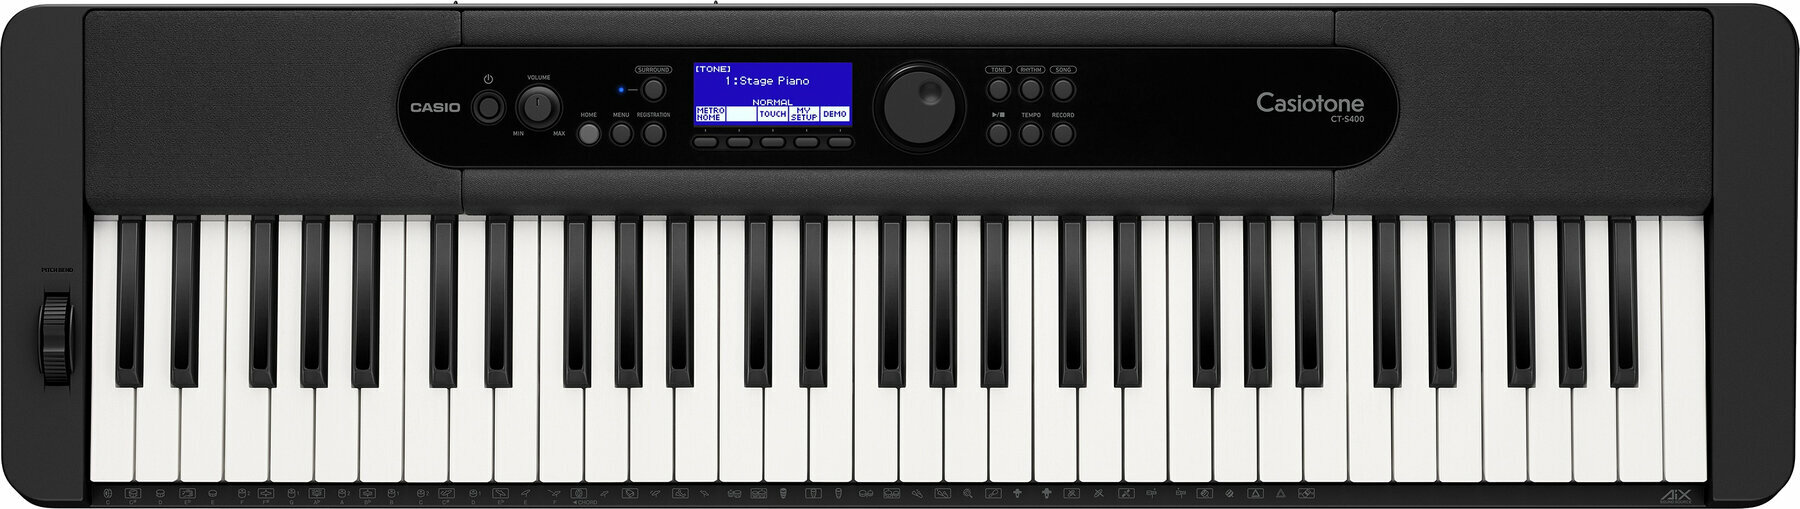 Keyboard with Touch Response Casio CT-S400